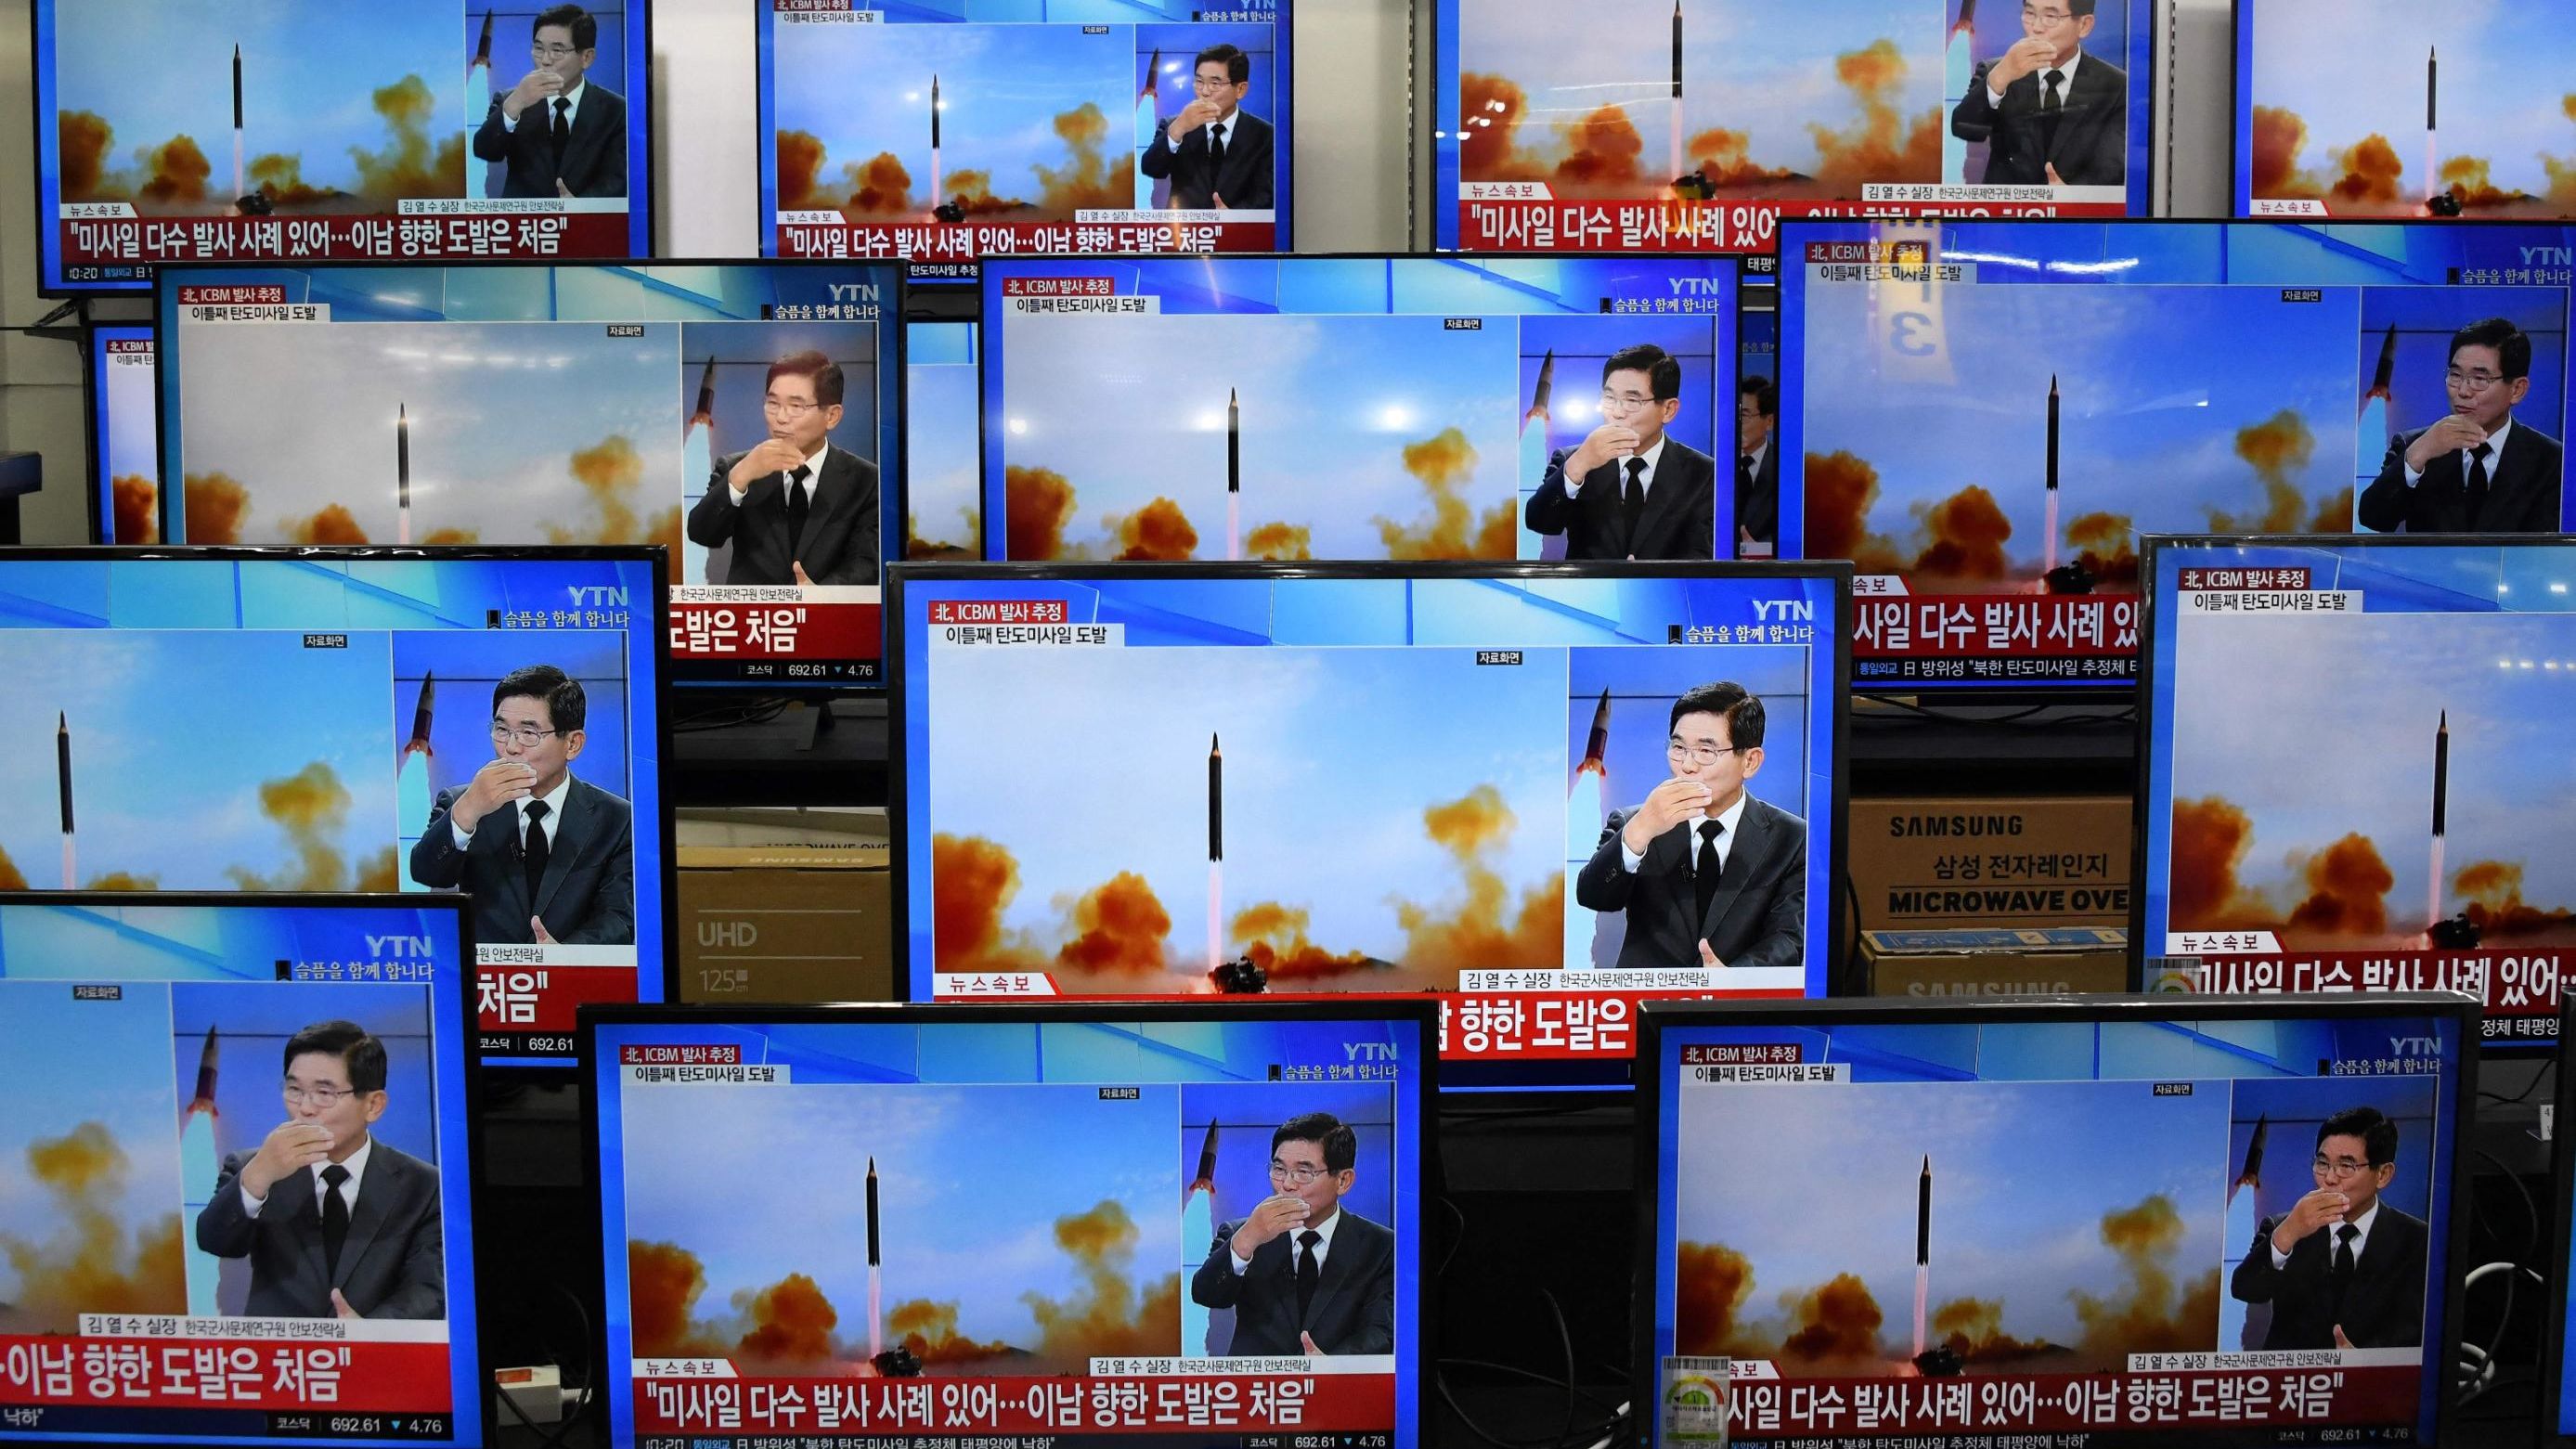 Television screens in an electronic market in Seoul show a news report about <a href="https://www.cnn.com/2022/11/02/asia/north-korea-missile-thursday-intl-hnk" target="_blank">the latest North Korean missile launch</a> with file footage on Thursday, November 3.